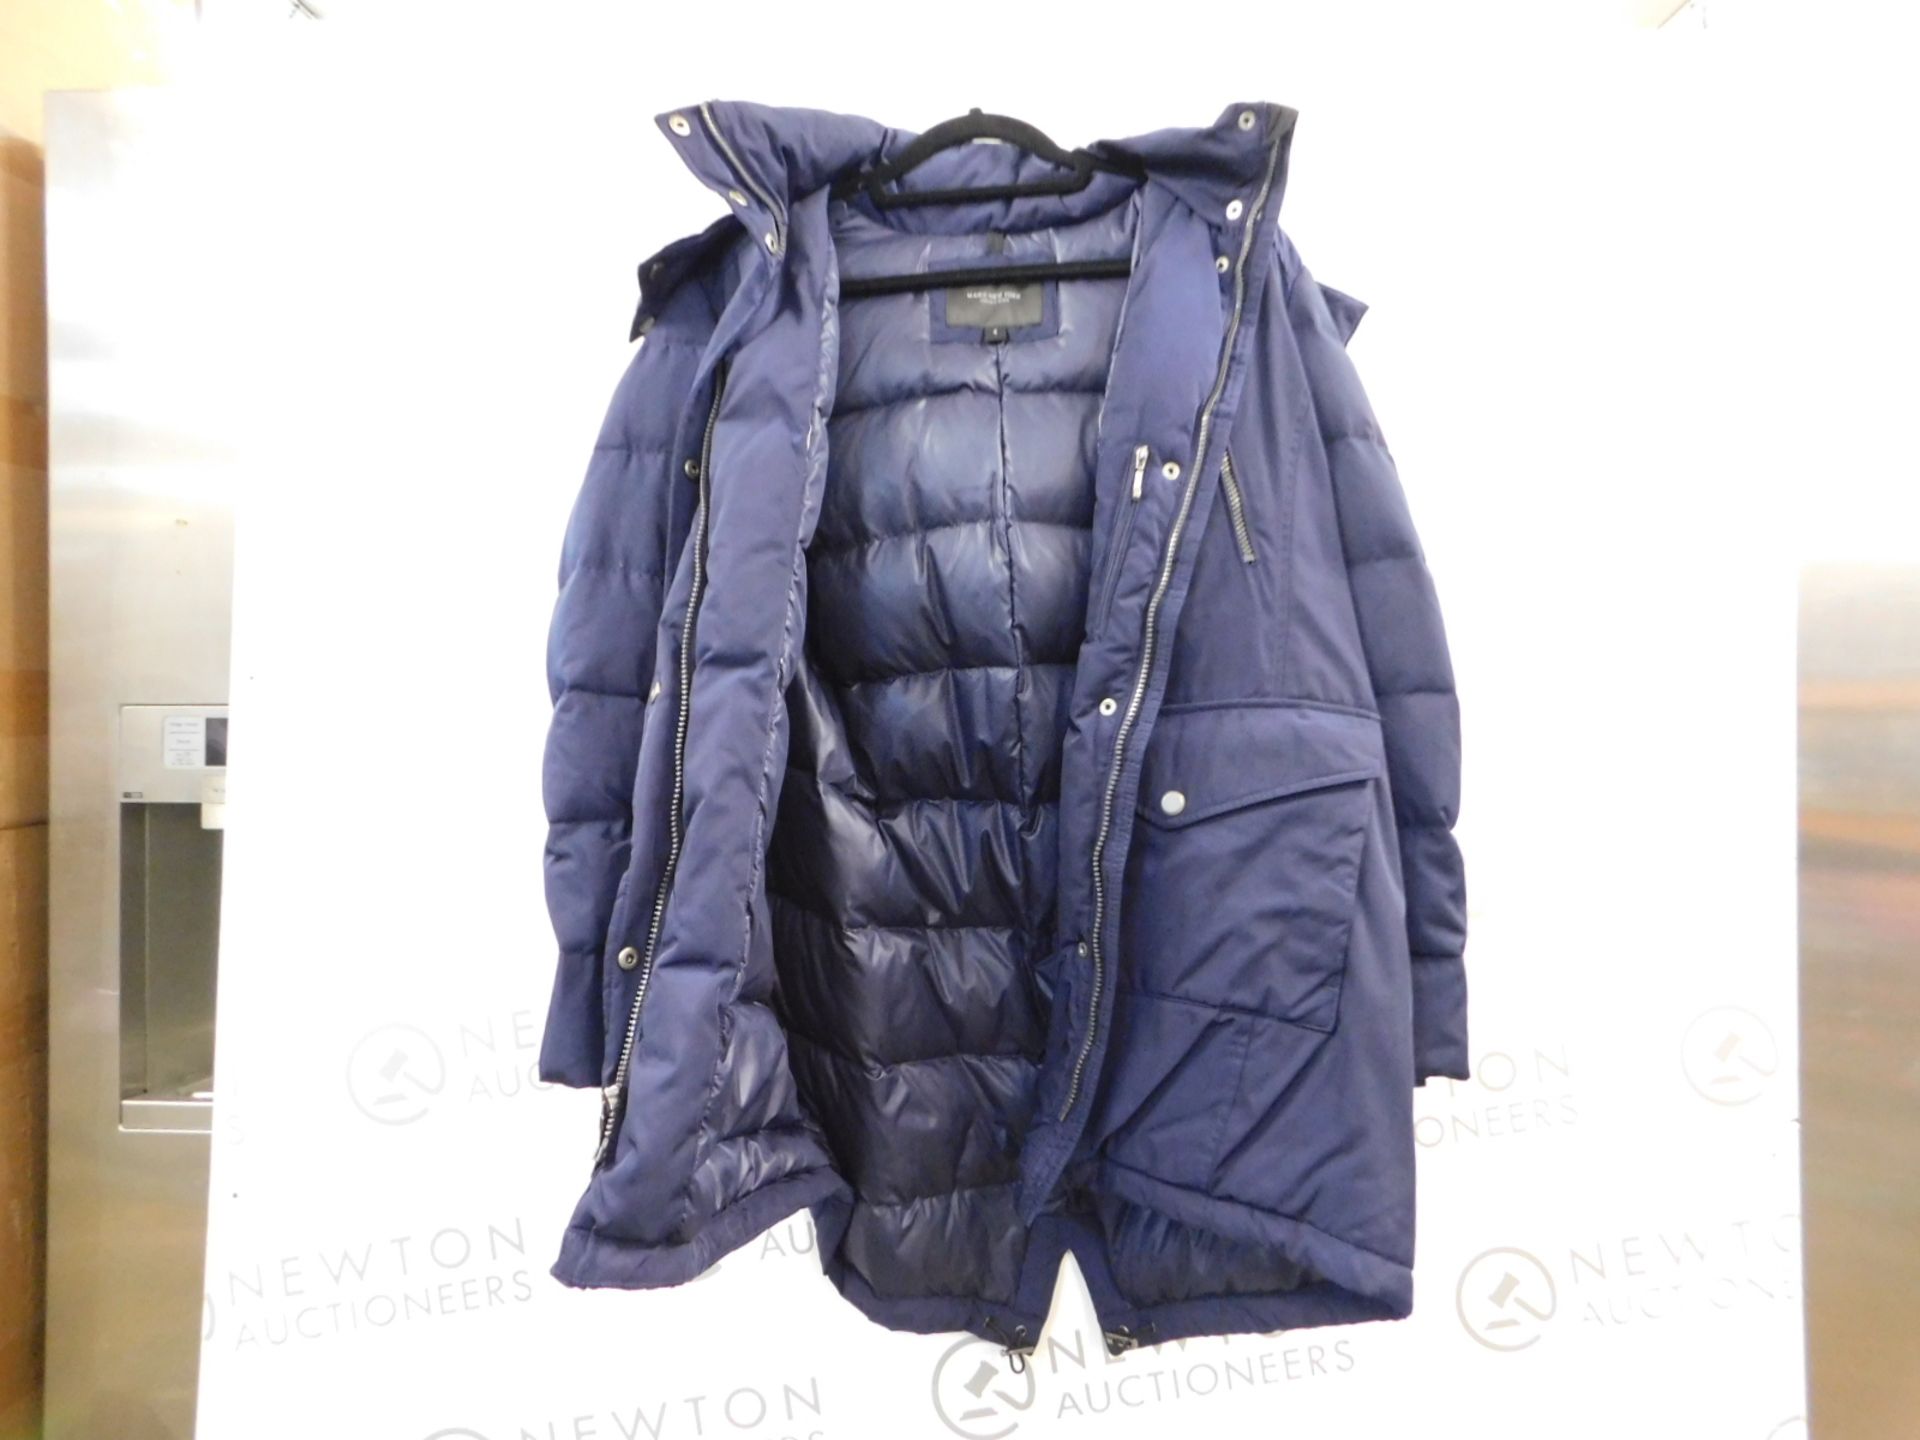 1 ANDREW MARC NEW YORK NAVY BLUE LADIES PADDED WINTER JACKET WITH FAUX FUR HOOD SIZE S RRP Â£89.99